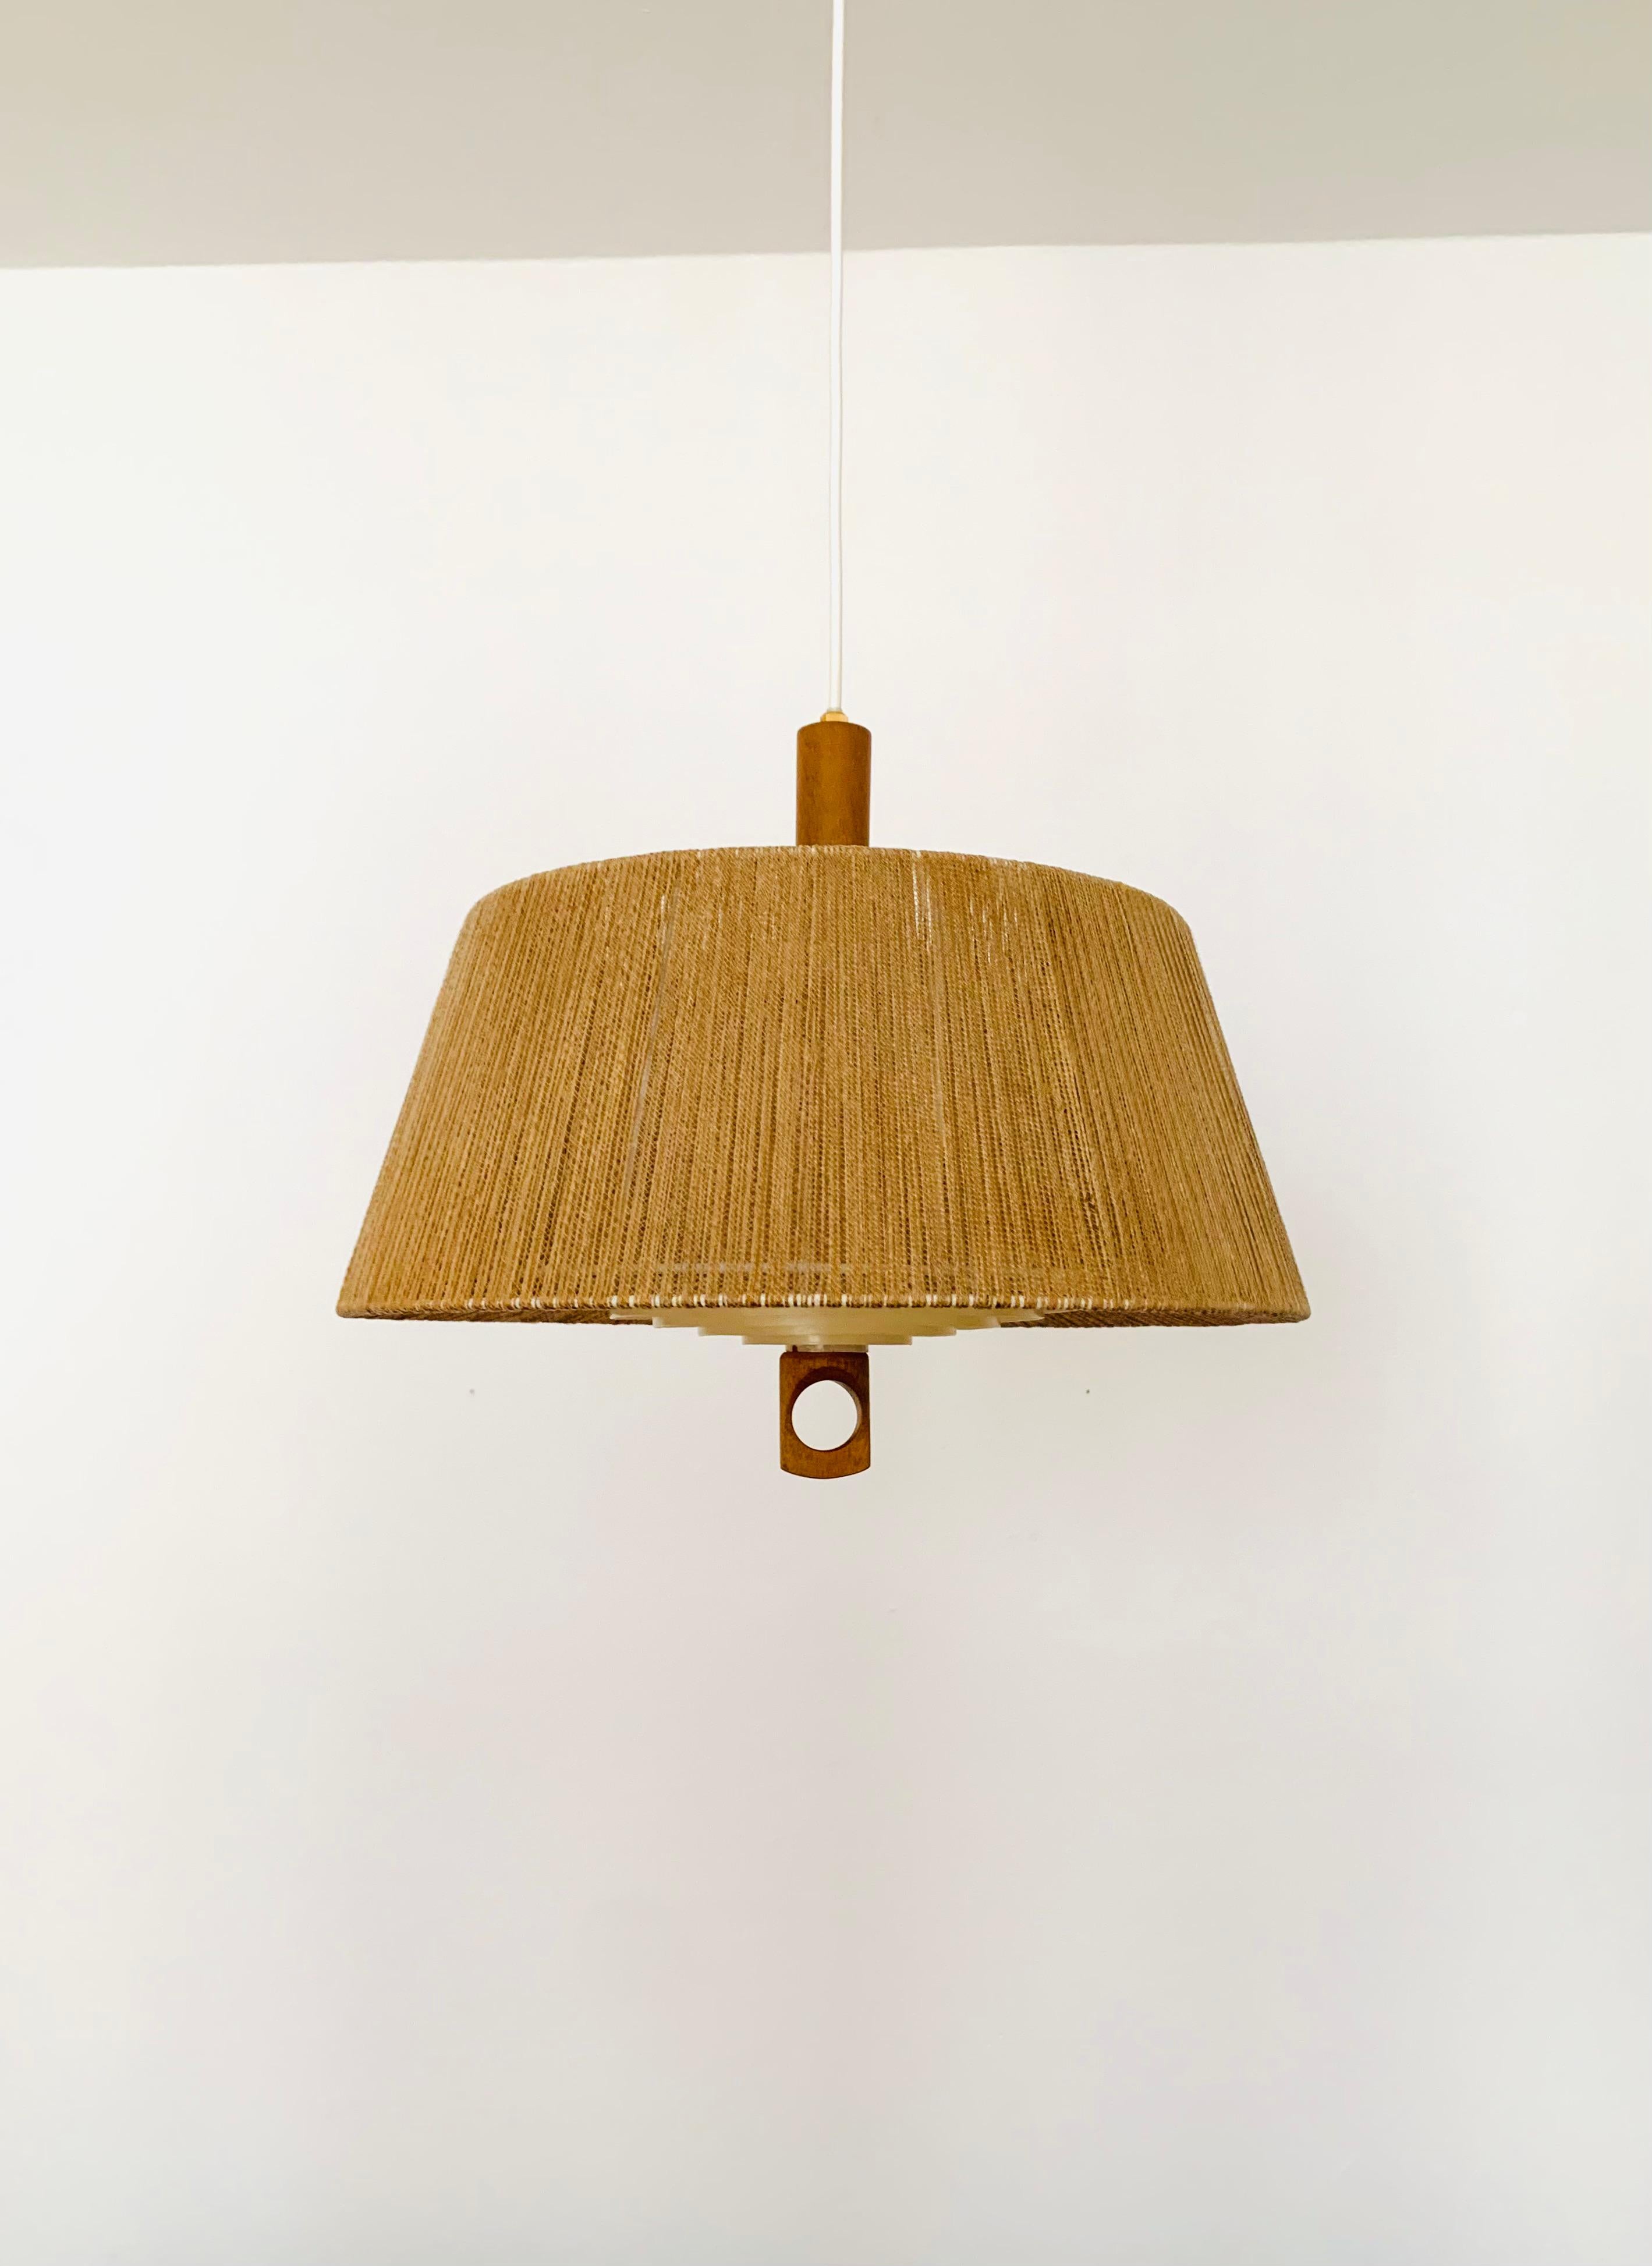 Exceptionally beautiful pendant light from the 1960s.
The design is very unusual.
The shape and the materials create a warm and very pleasant light.

Condition:

Very good vintage condition with slight signs of wear consistent with age.
The